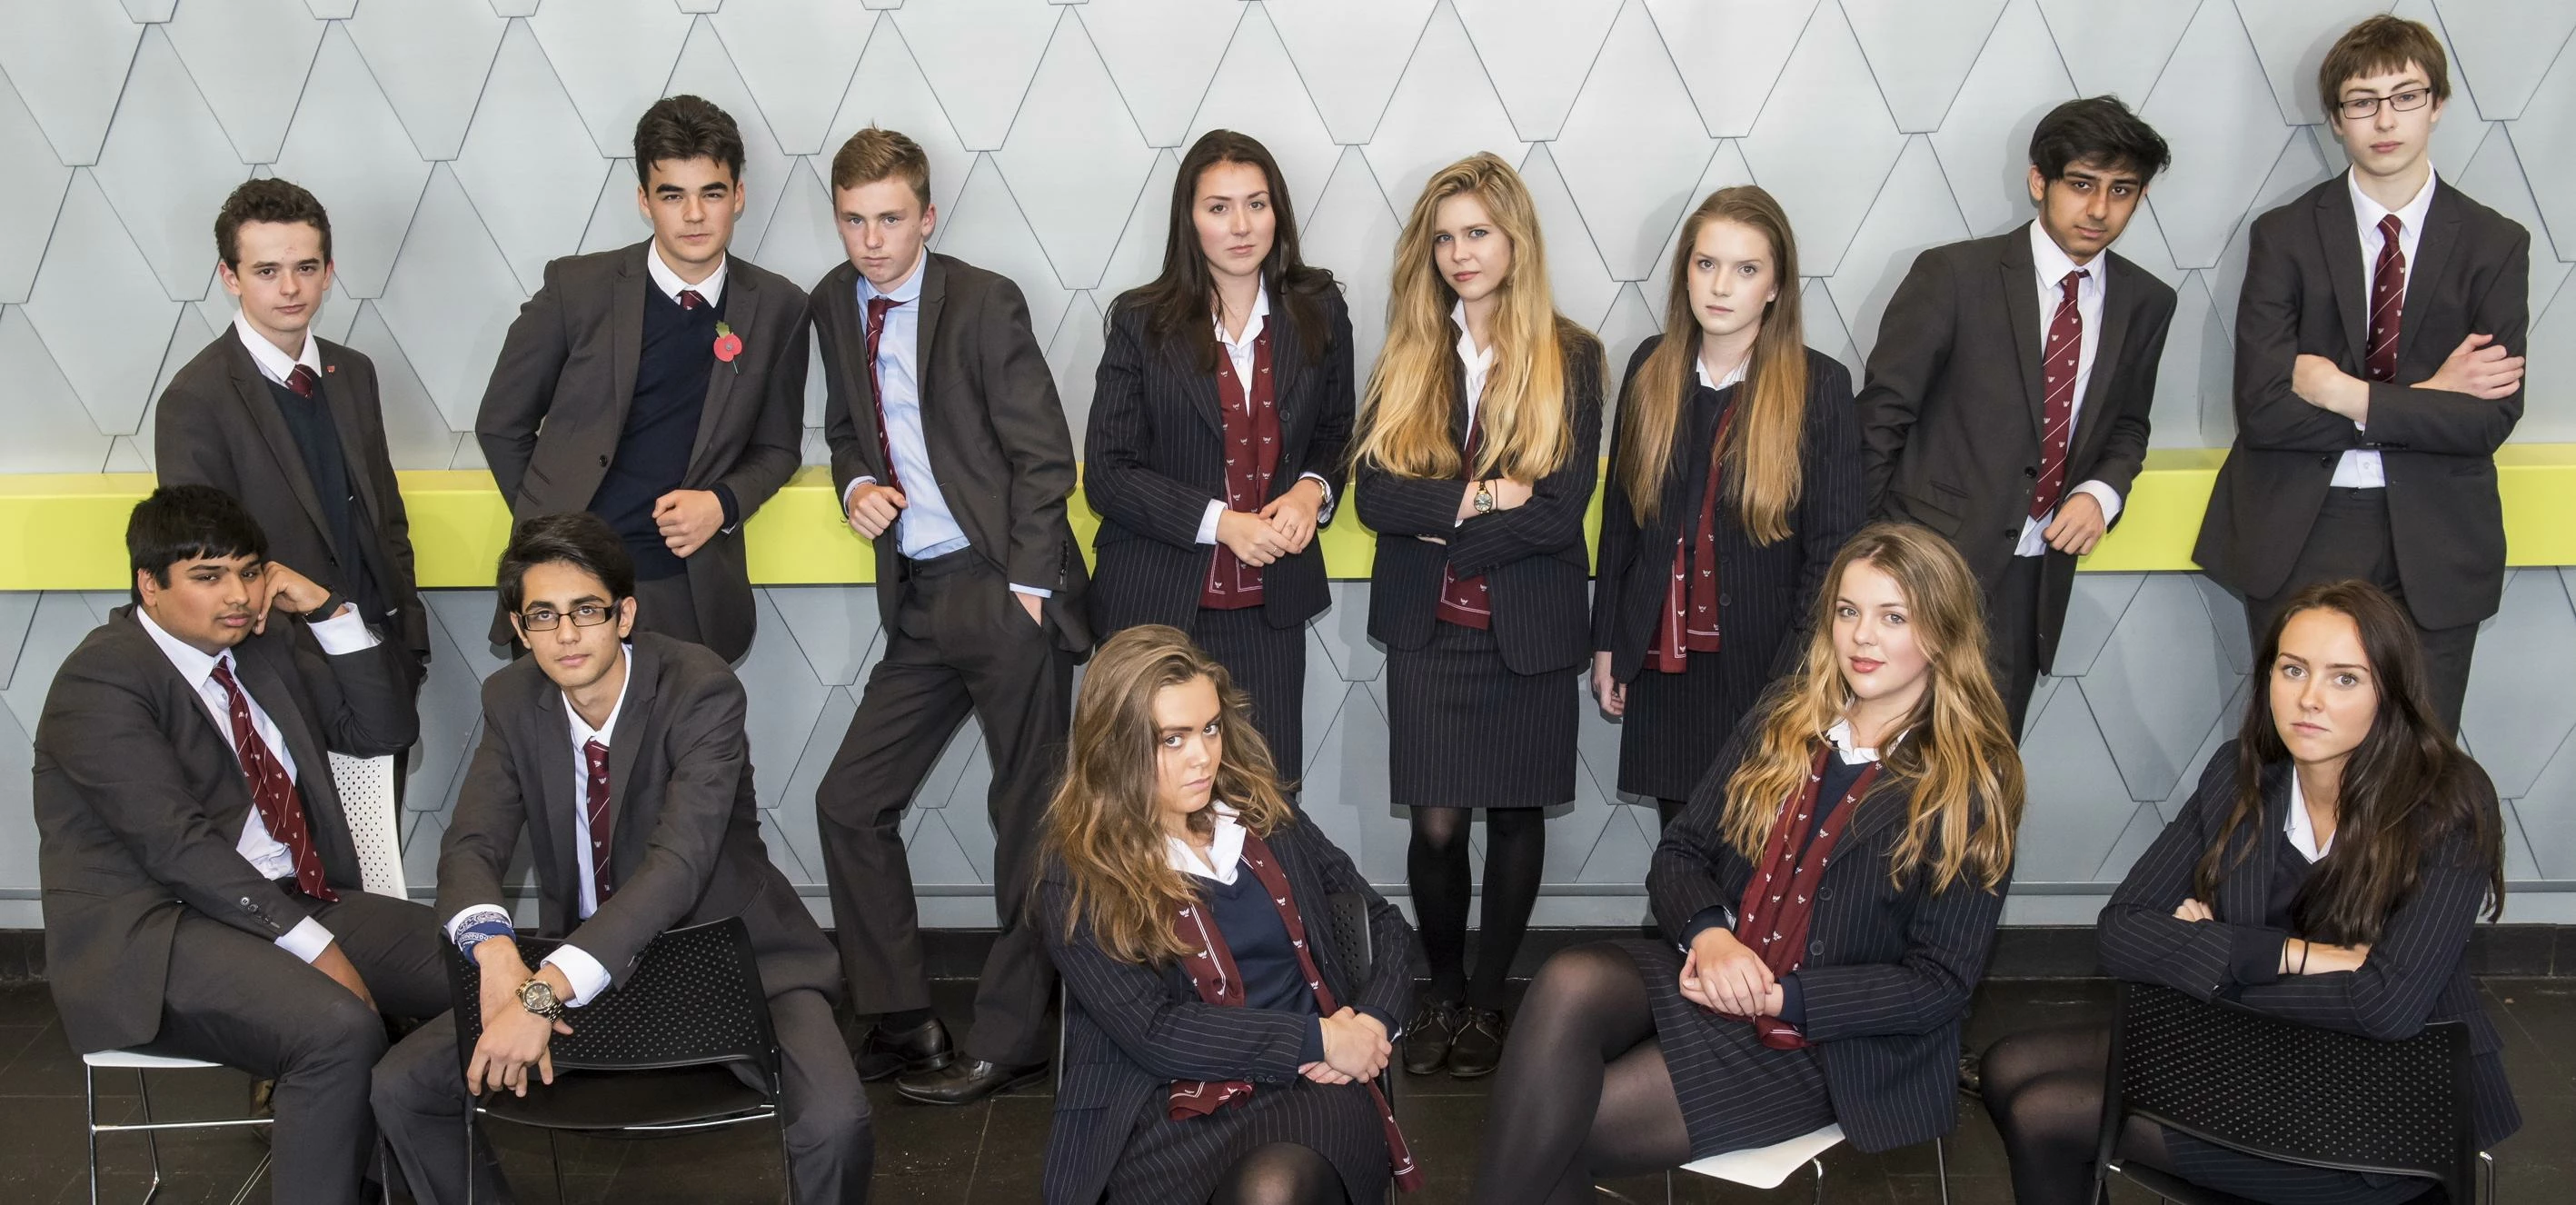 Students at Yarm School taking part in their own version of The Apprentice